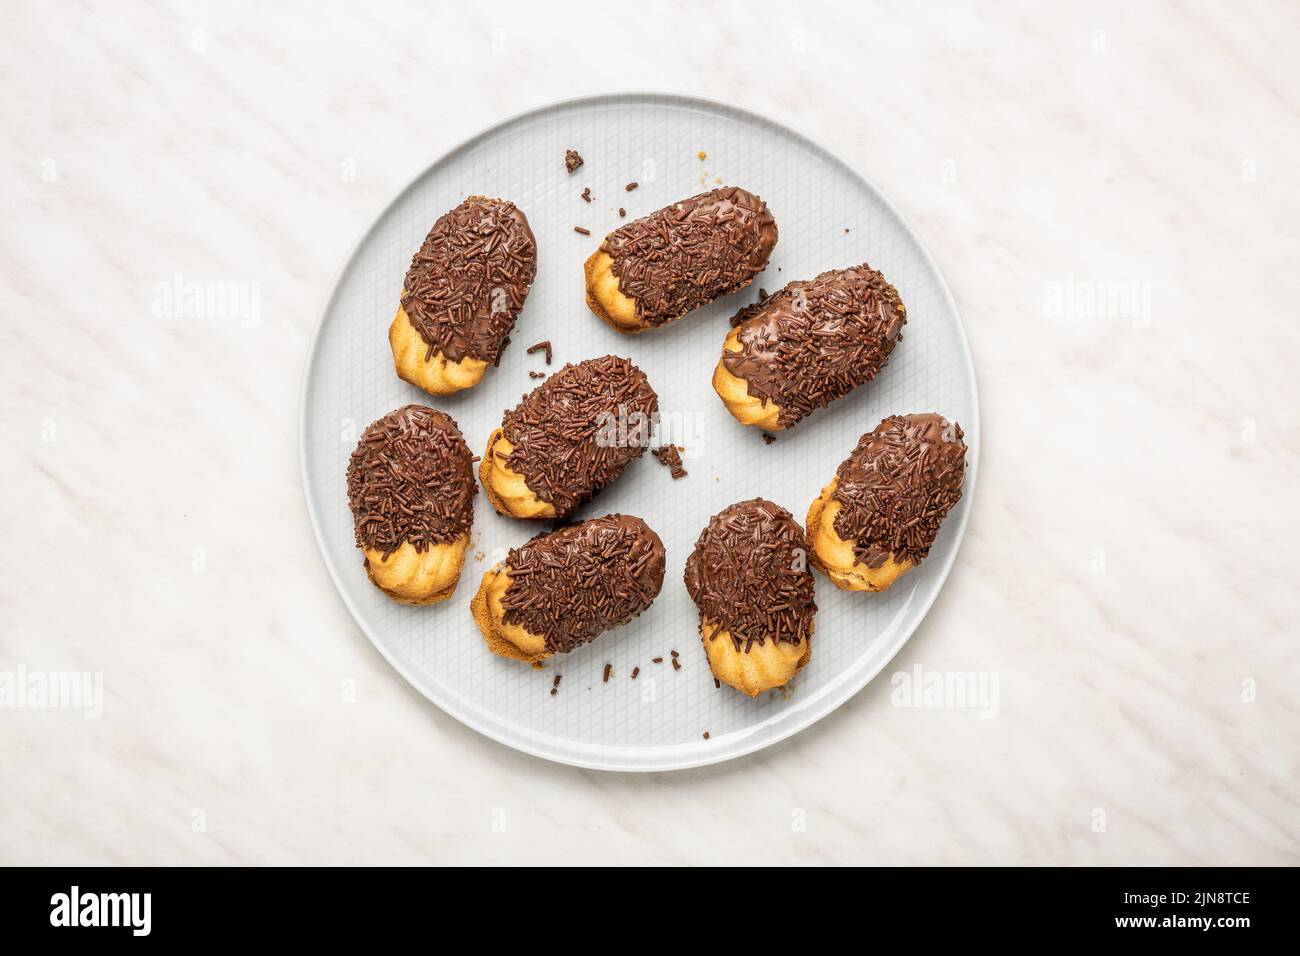 Petit fours with chocolate sprinkles on kitchen table. Mini chocolate dessert on a plate. Top view. Stock Photo